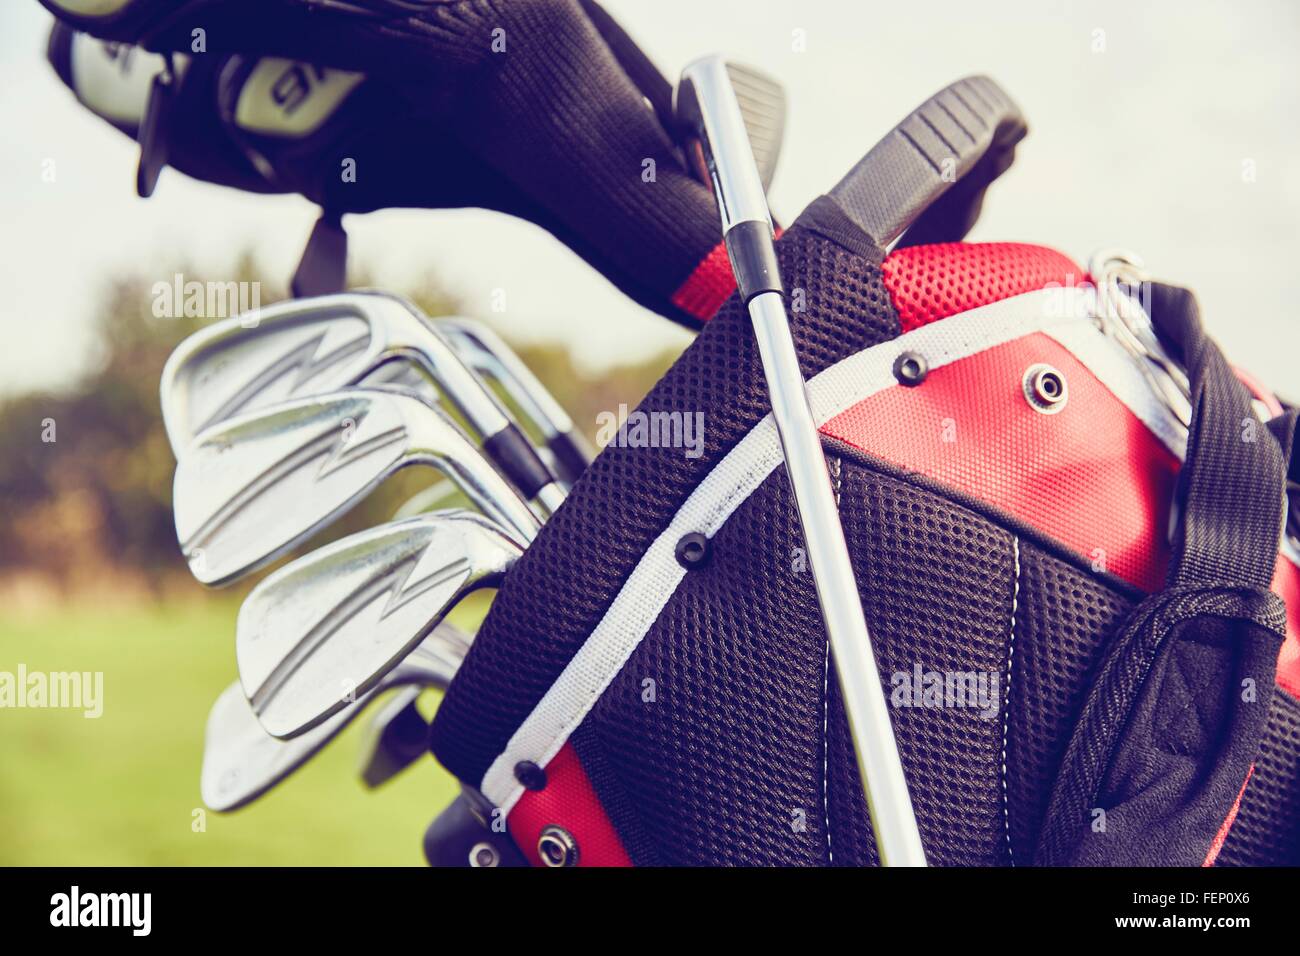 Close up view of golf bag with clubs Stock Photo